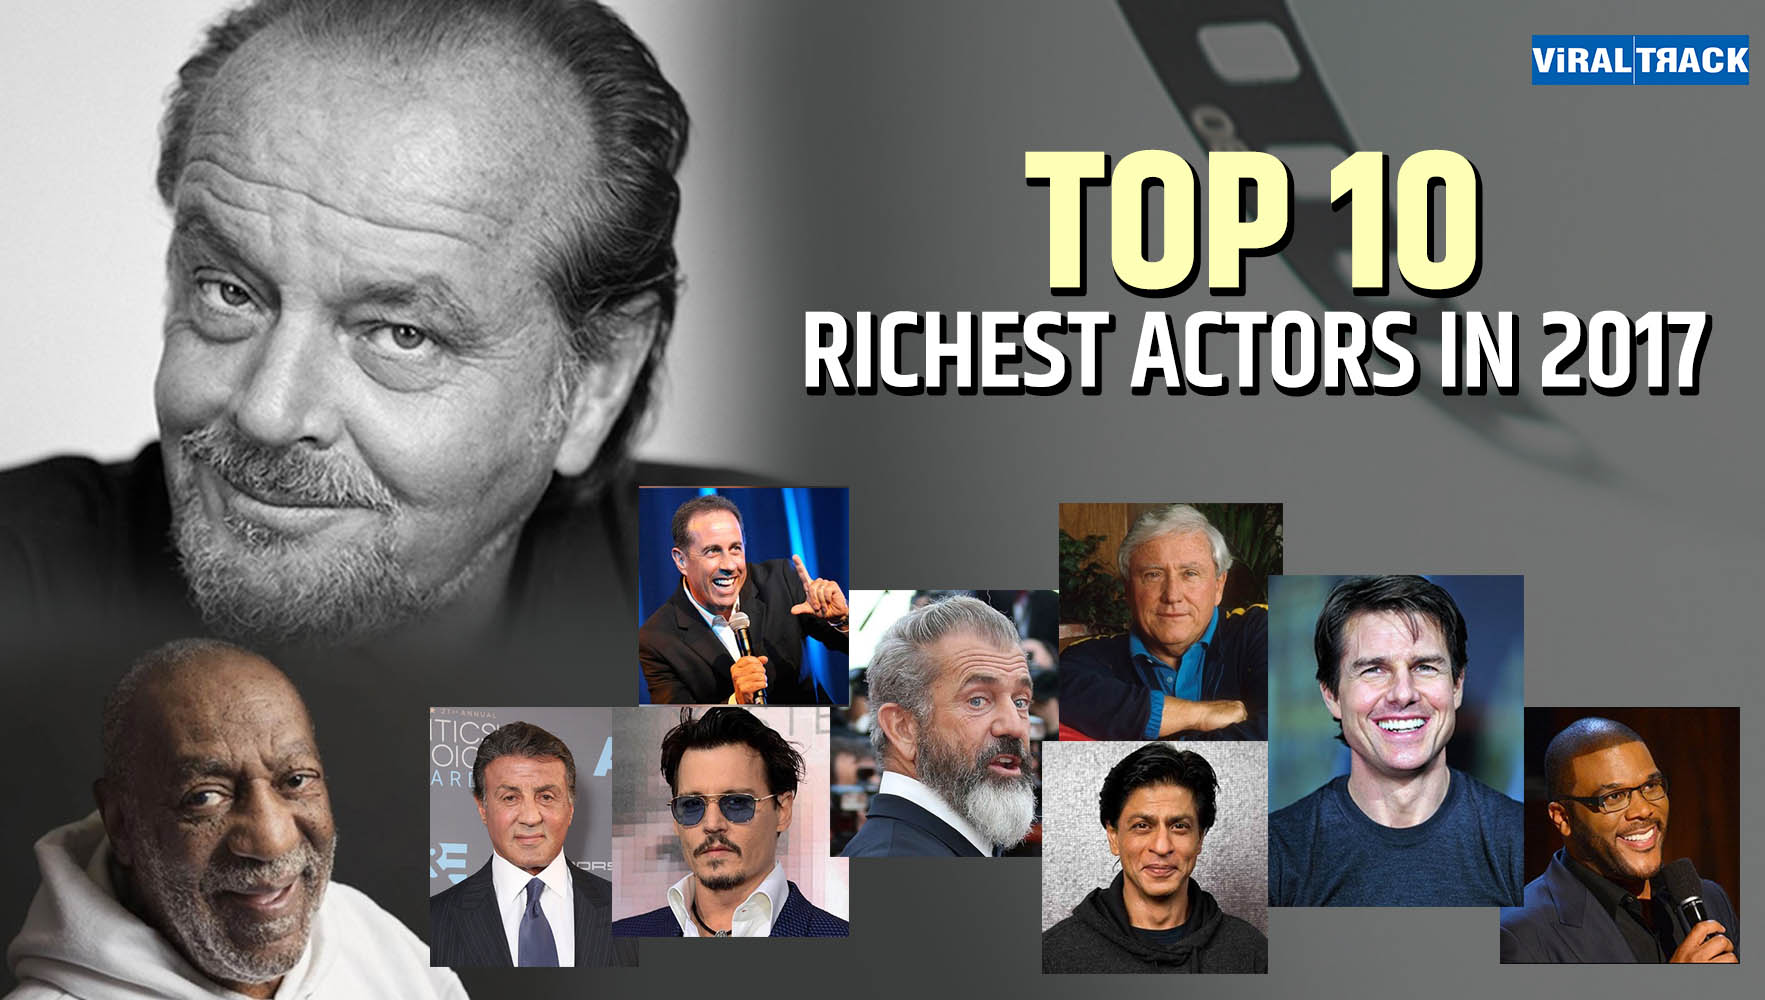 Top 10 Richest Actor of 2017, Johnny Depp Is On No. 7